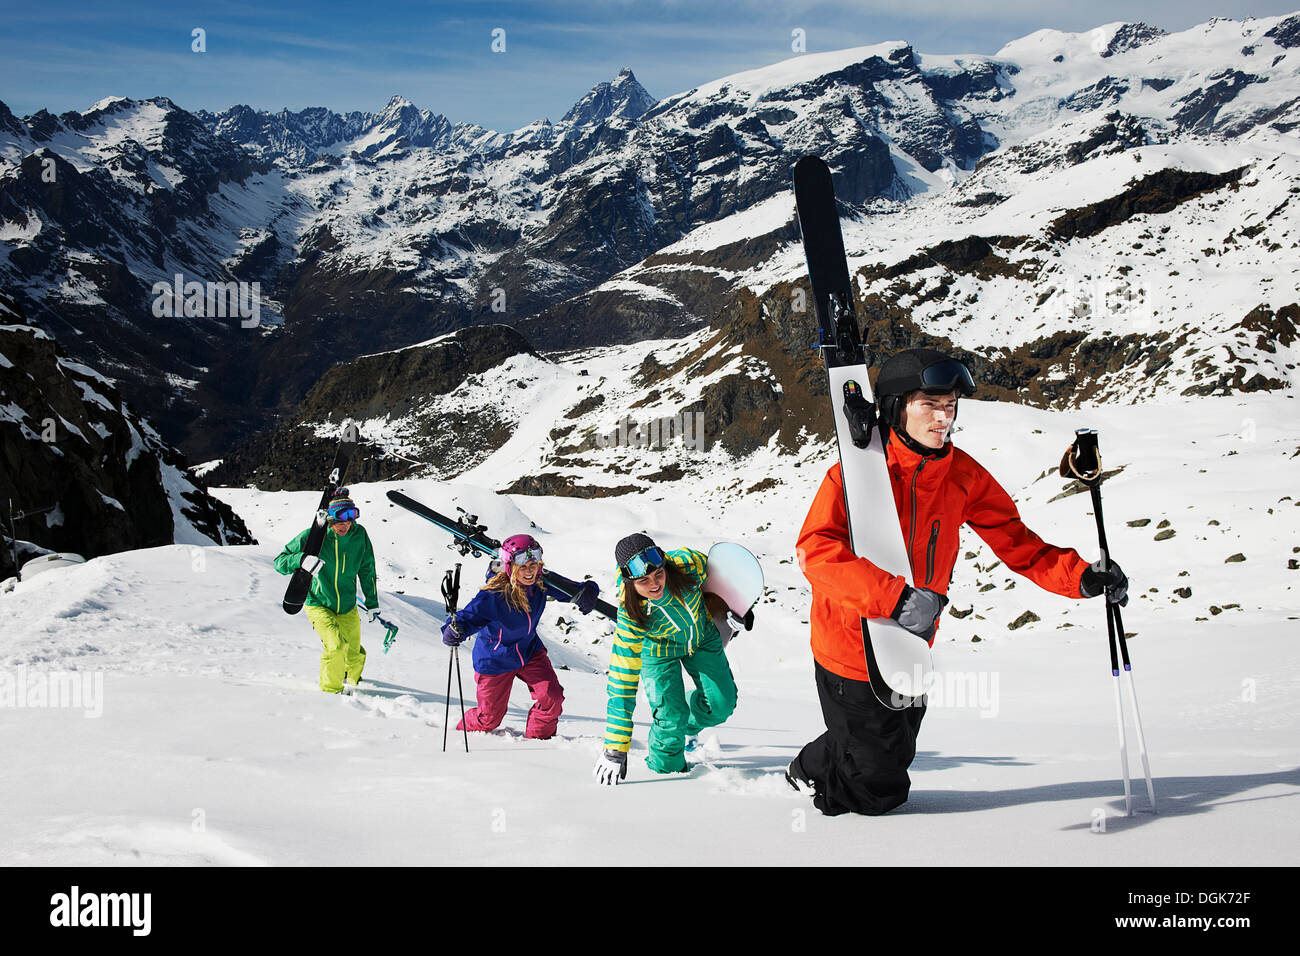 Group of skiers climbing mountain with ski equipment Stock Photo